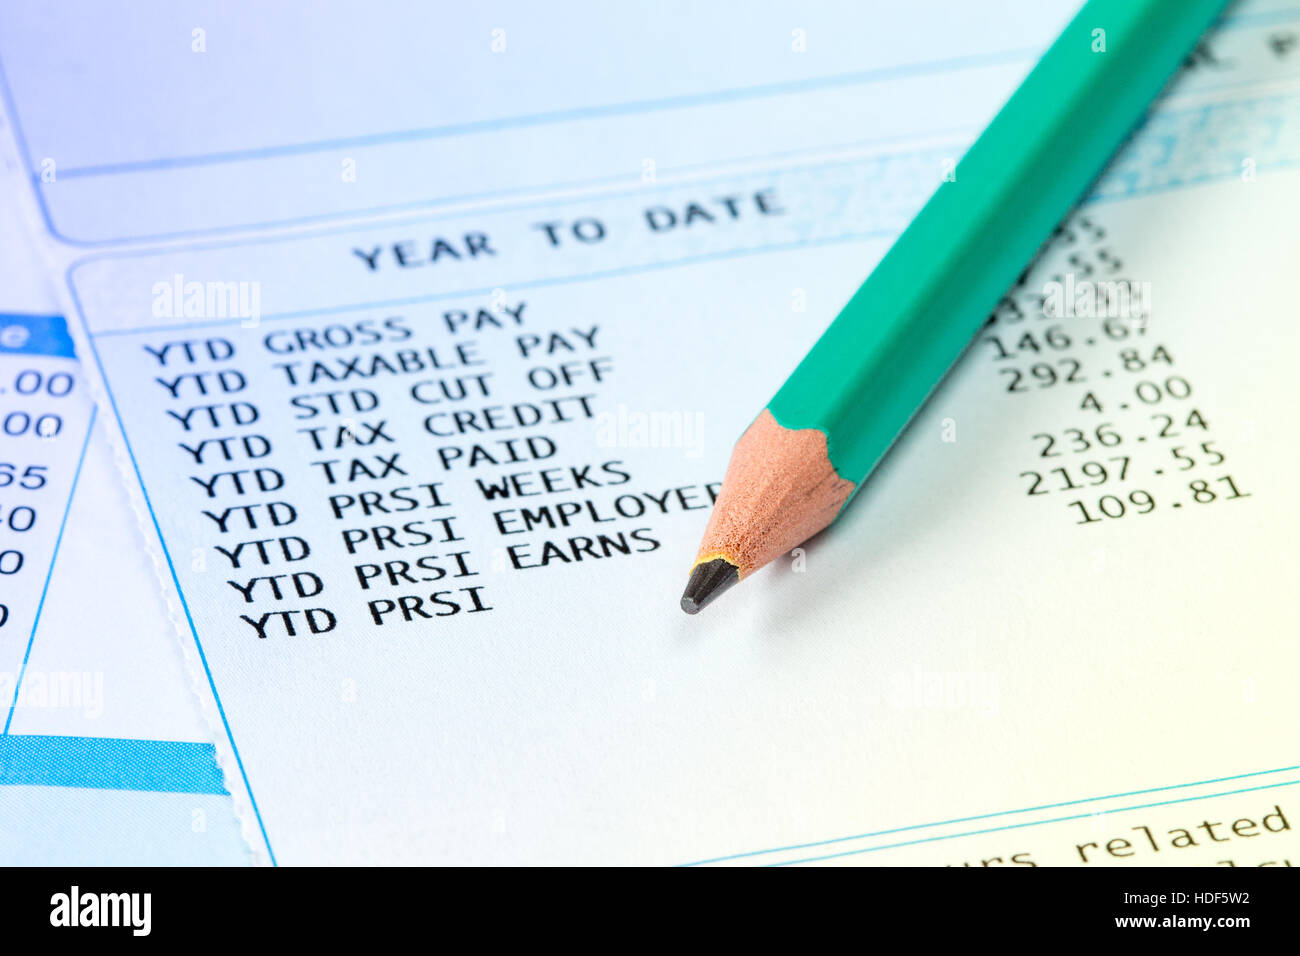 Statement of payroll details with a pencil. Financial accounting concept. Stock Photo